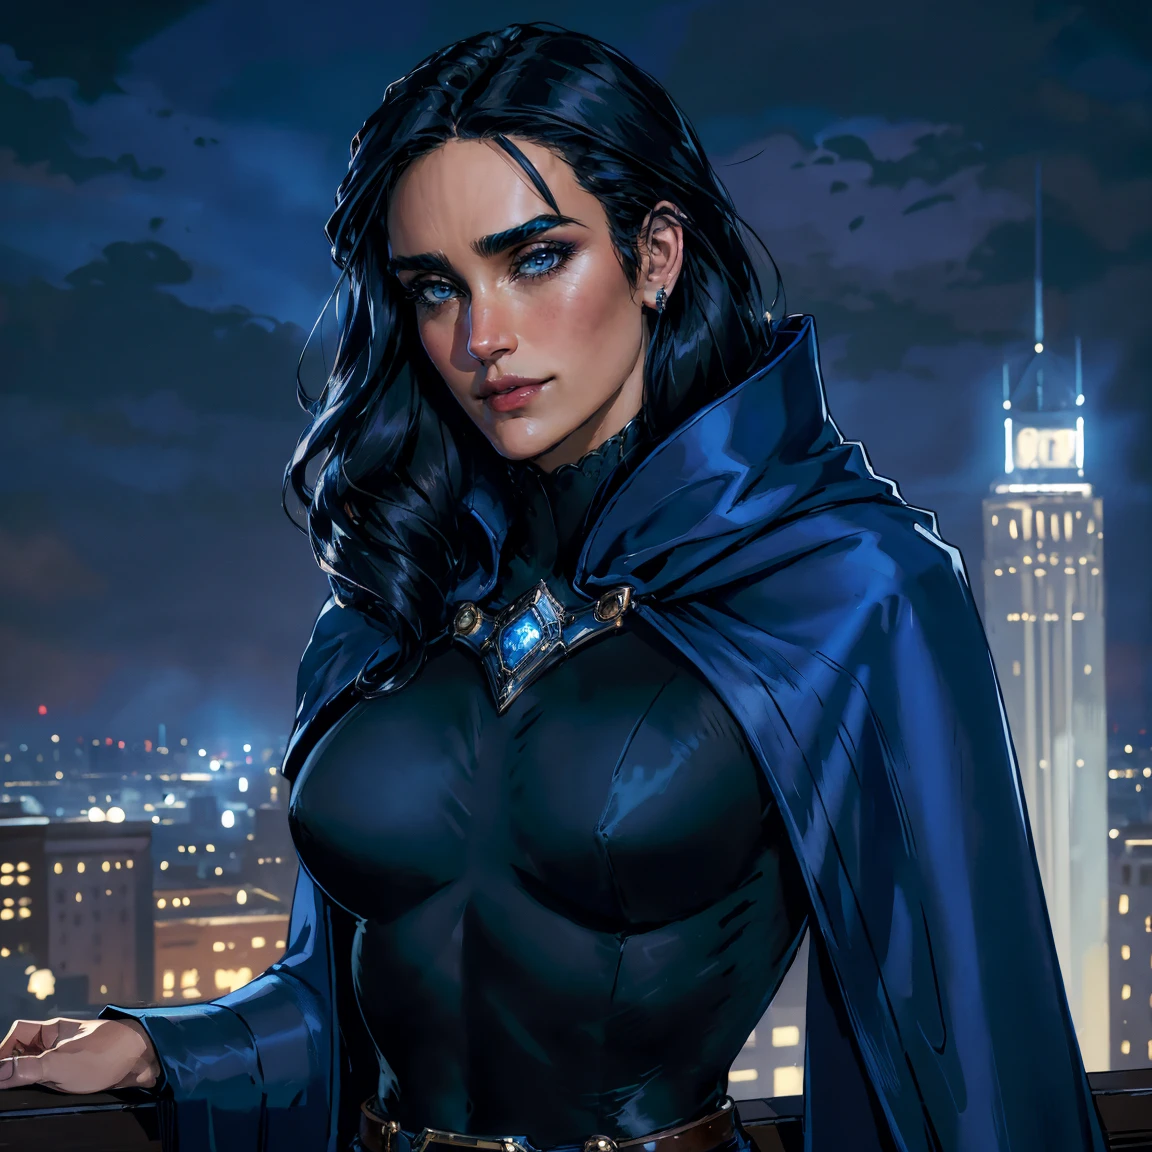 Masterpiece, Jennifer Connelly, cowboy shot, RavenTT, wearing a sexy RavenTT navy-blue cloak, black leotard, brooch, belt, perfect detailed eyes, delicate smile on your face, on the top of a loft in Los Angeles City at night with buildings and lights in the background bringing an elegant and modern air to the scene.